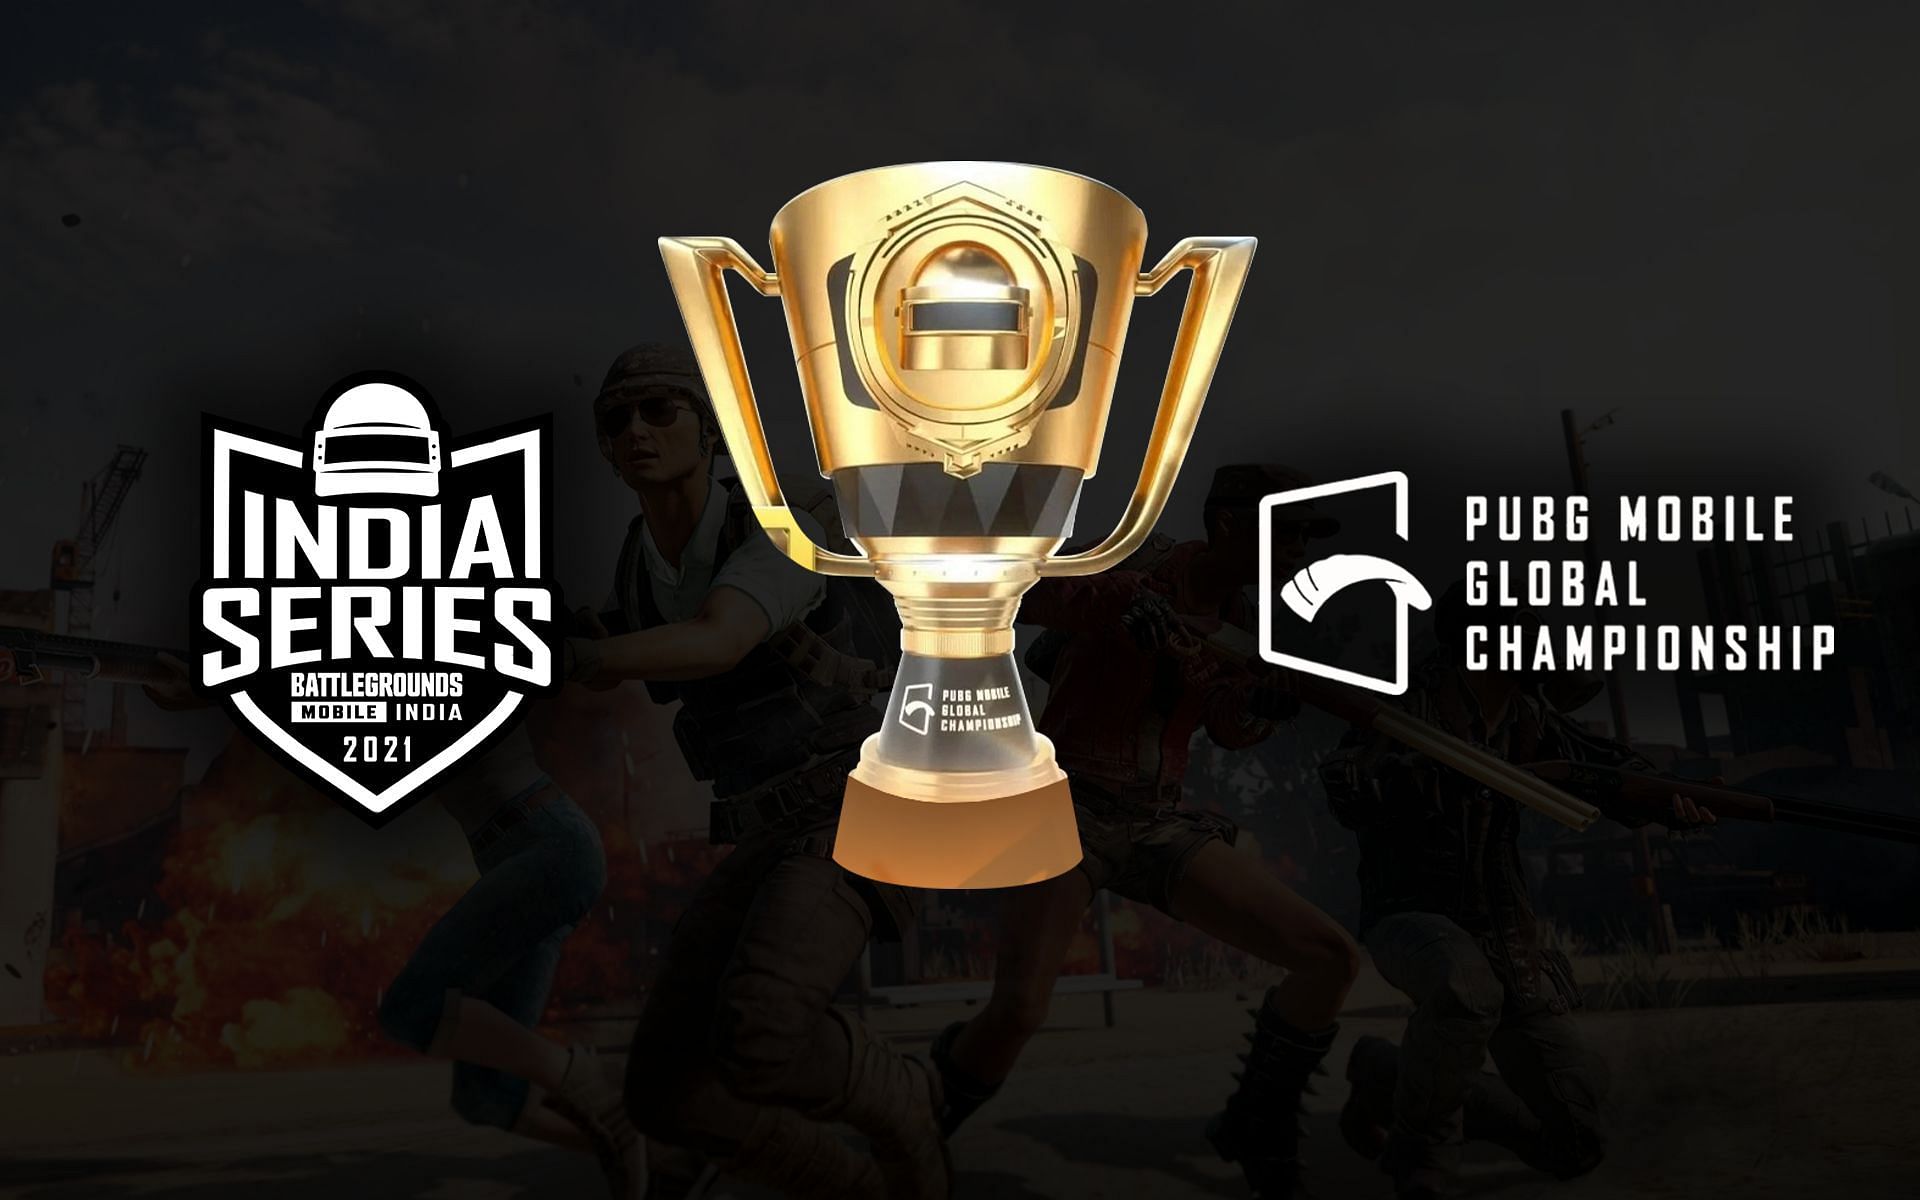 The PUBG Mobile Global Championship 2021 Grand Finals will start on 21 January